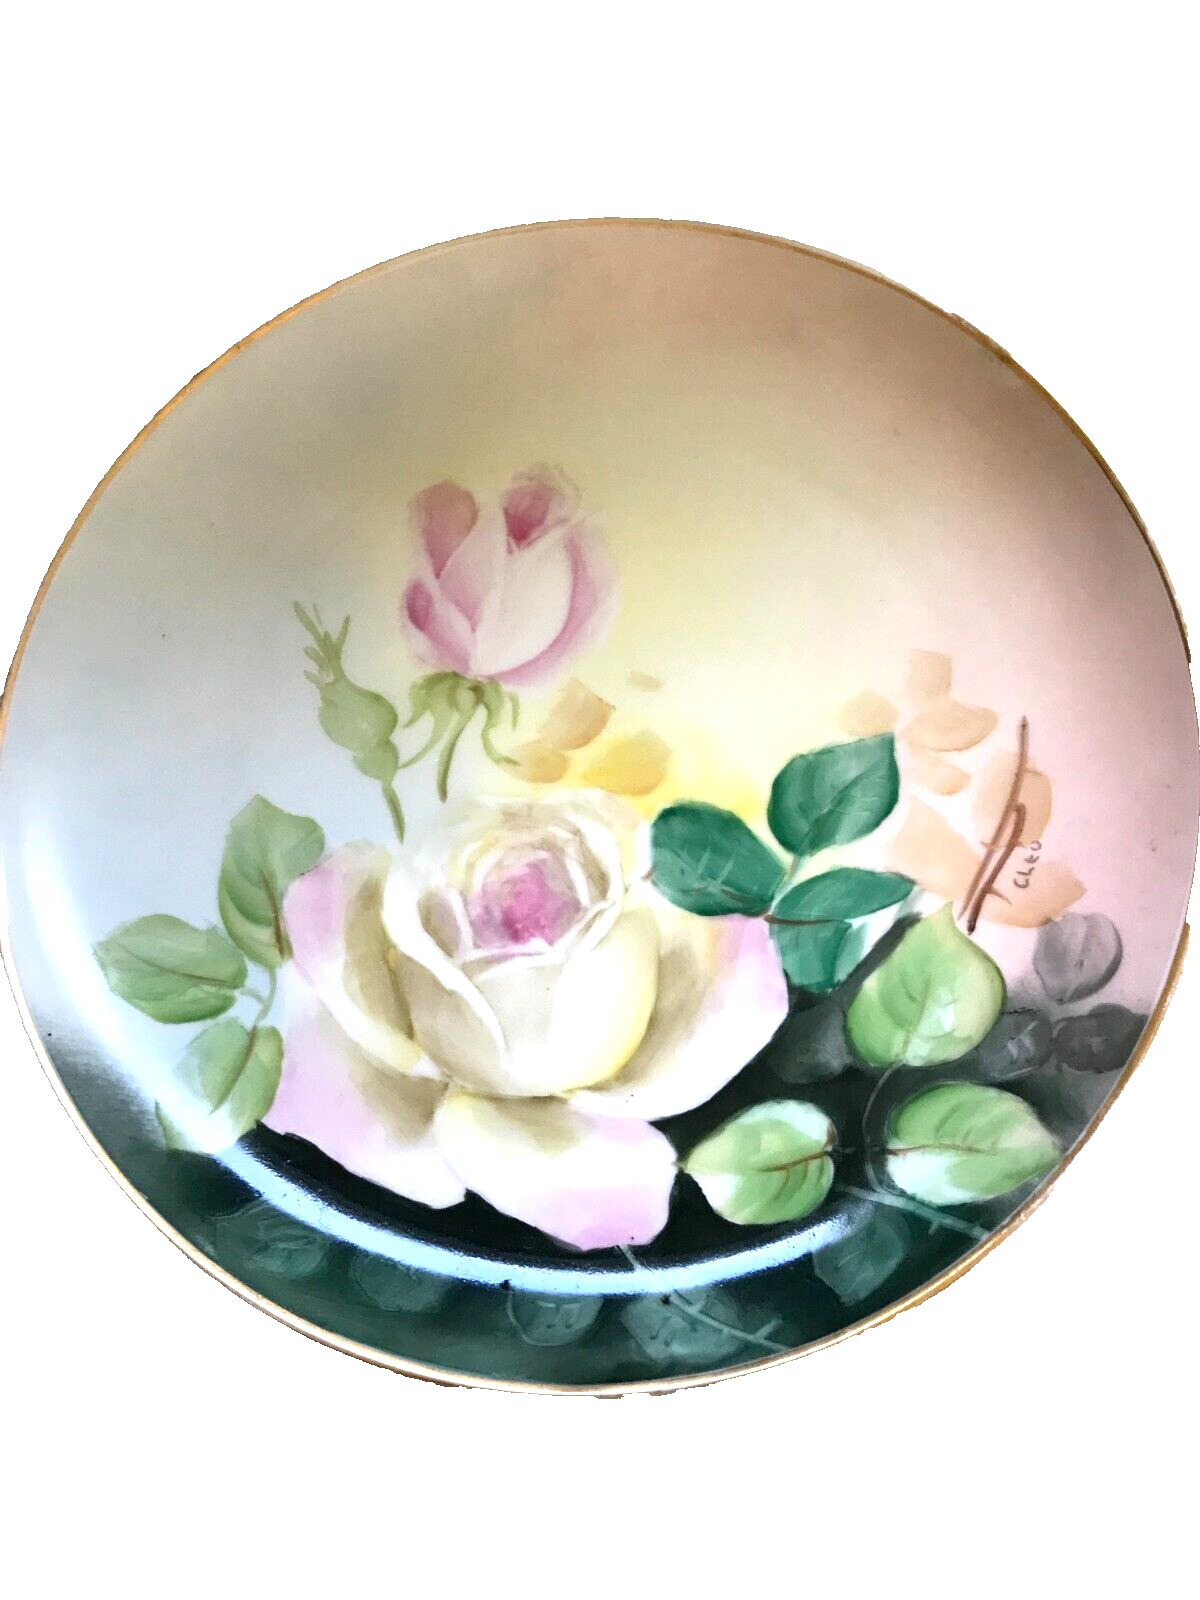 BAVARIA HAND PAINTED DECORATIVE PLATE WITH PINK & YELLOW ROSES ARTIST SIGNED